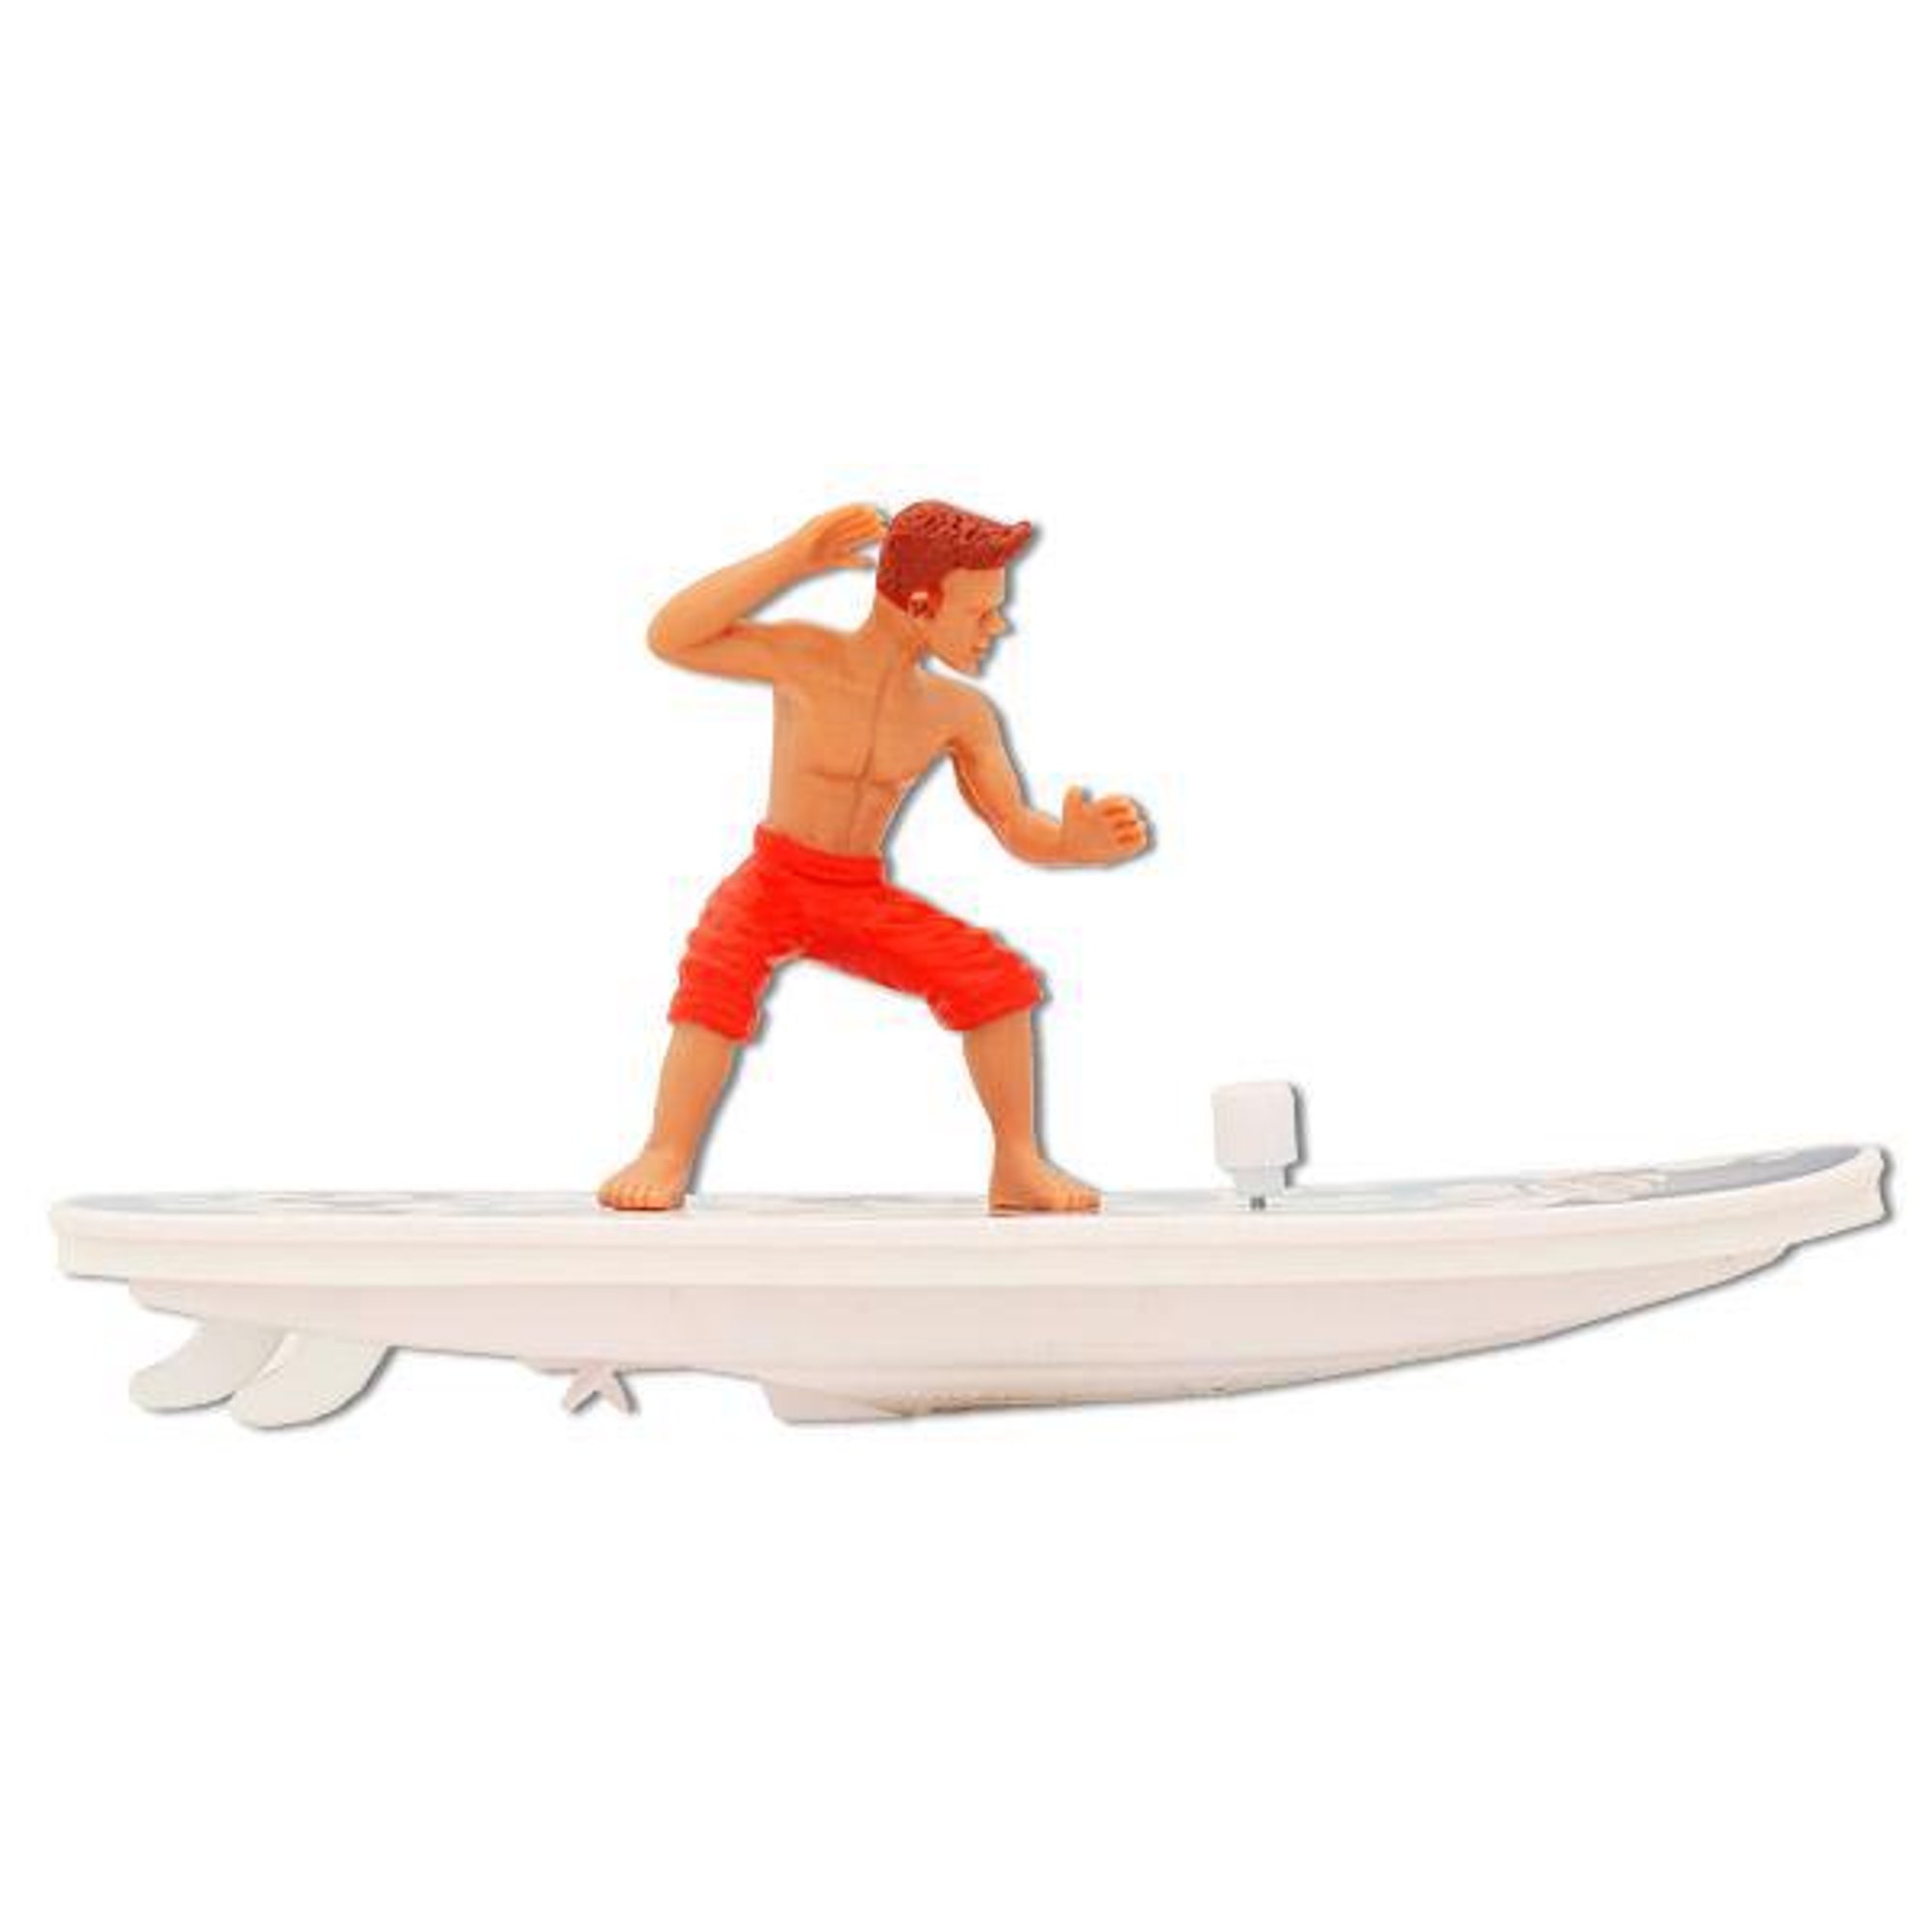 Ron Jon Wind Up Surfer Guy - Toys and Games | Ron Jon Surf Shop